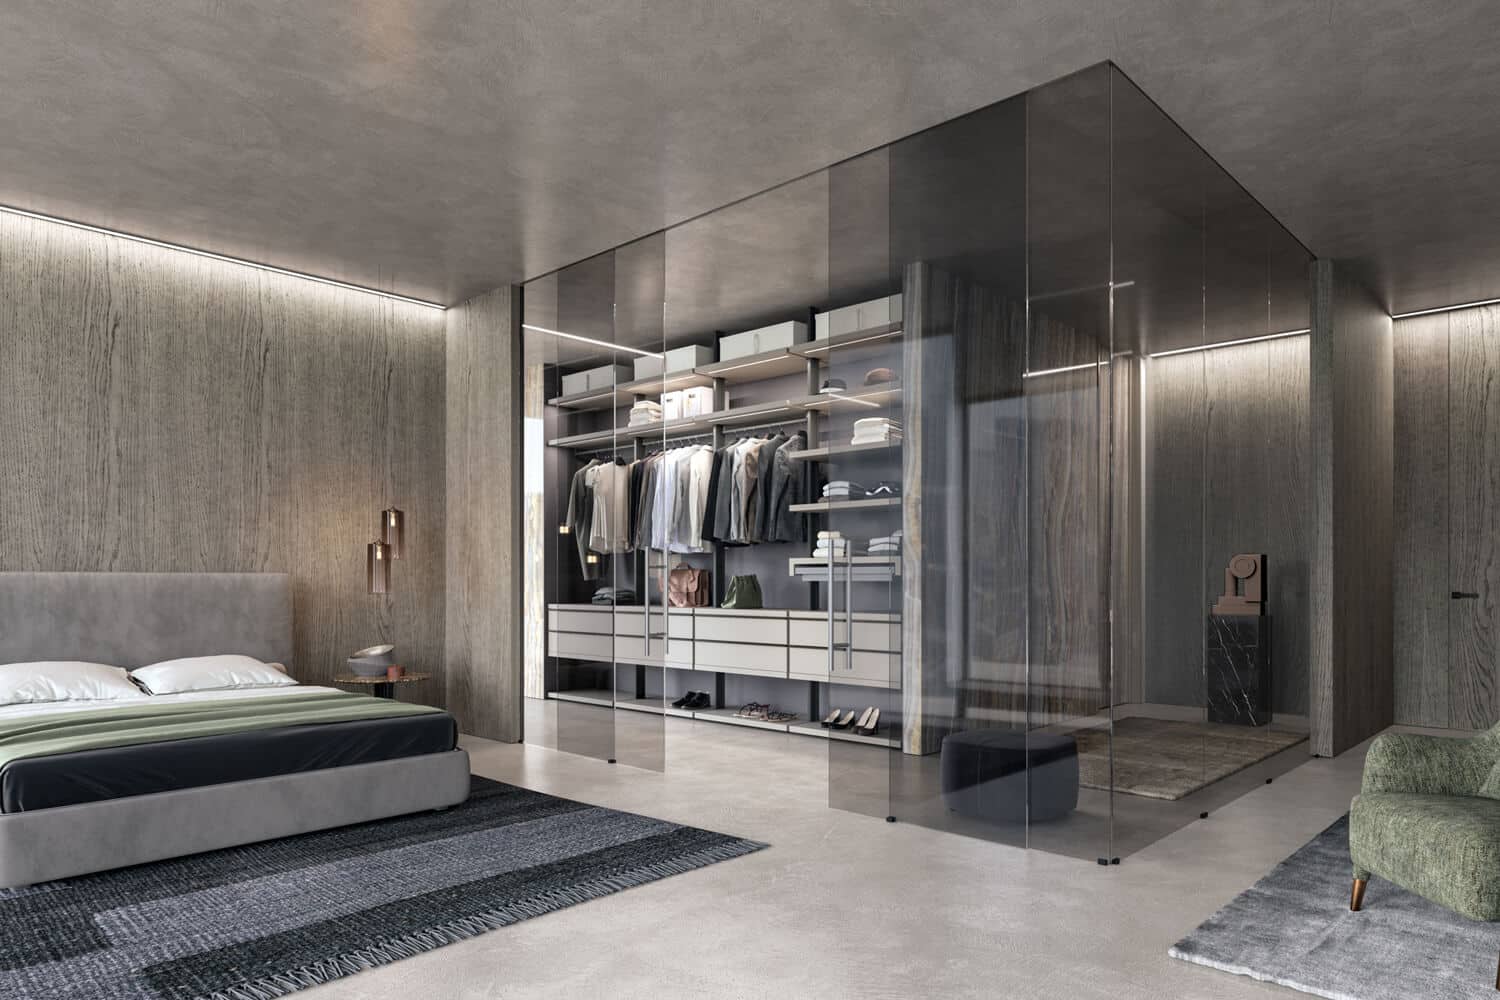 Clear grey inside-sliding doors with matching panels. An ideal solution to separate the walk-in closet while keeping the bedroom feeling expansive.